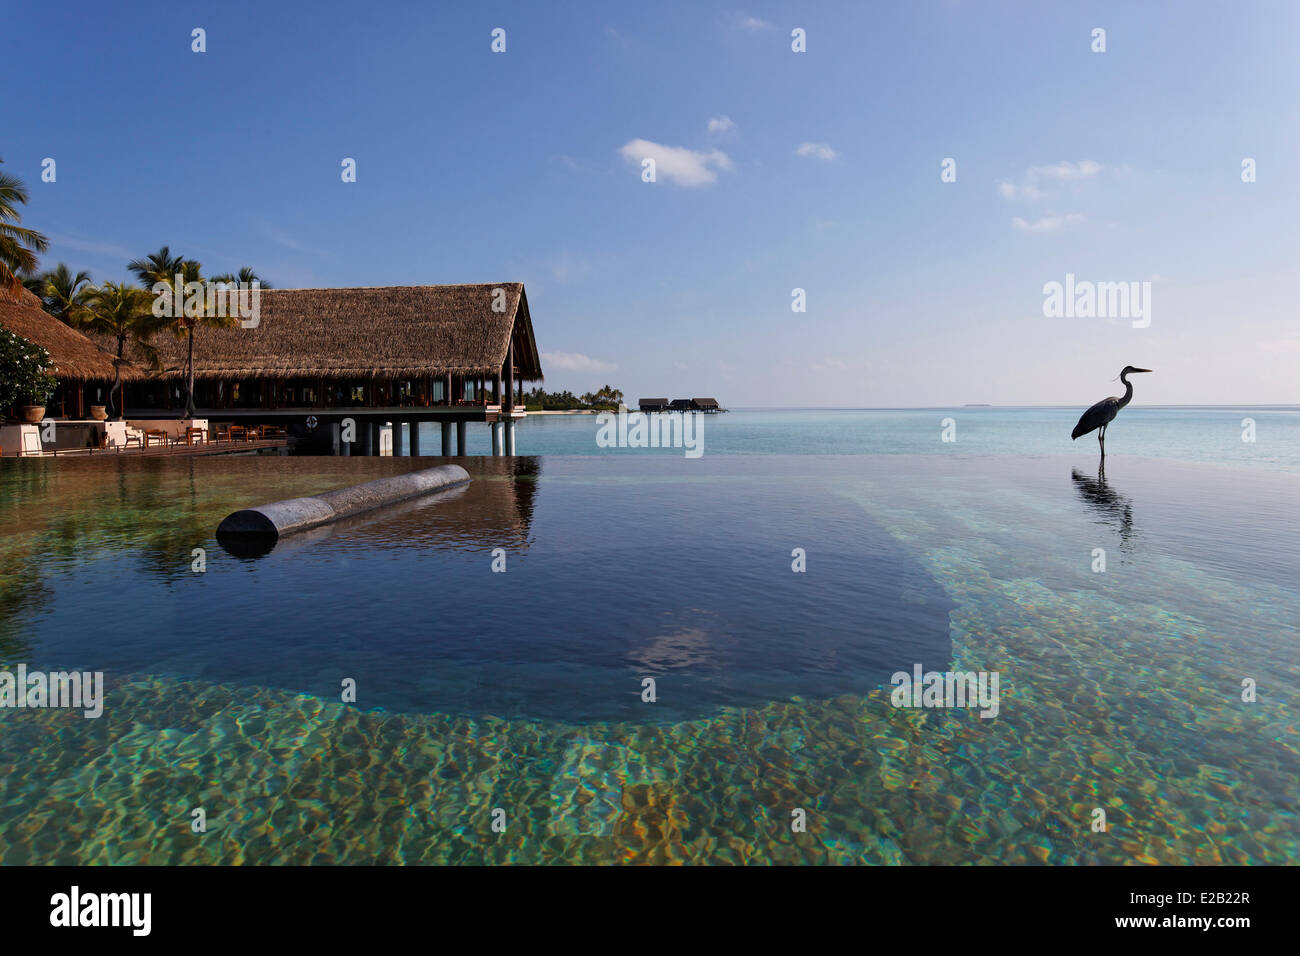 Maldives, Kaafu North Male atoll, One & Only Reeethi Rah hotel, heron on the swimming pool with overflowing Stock Photo